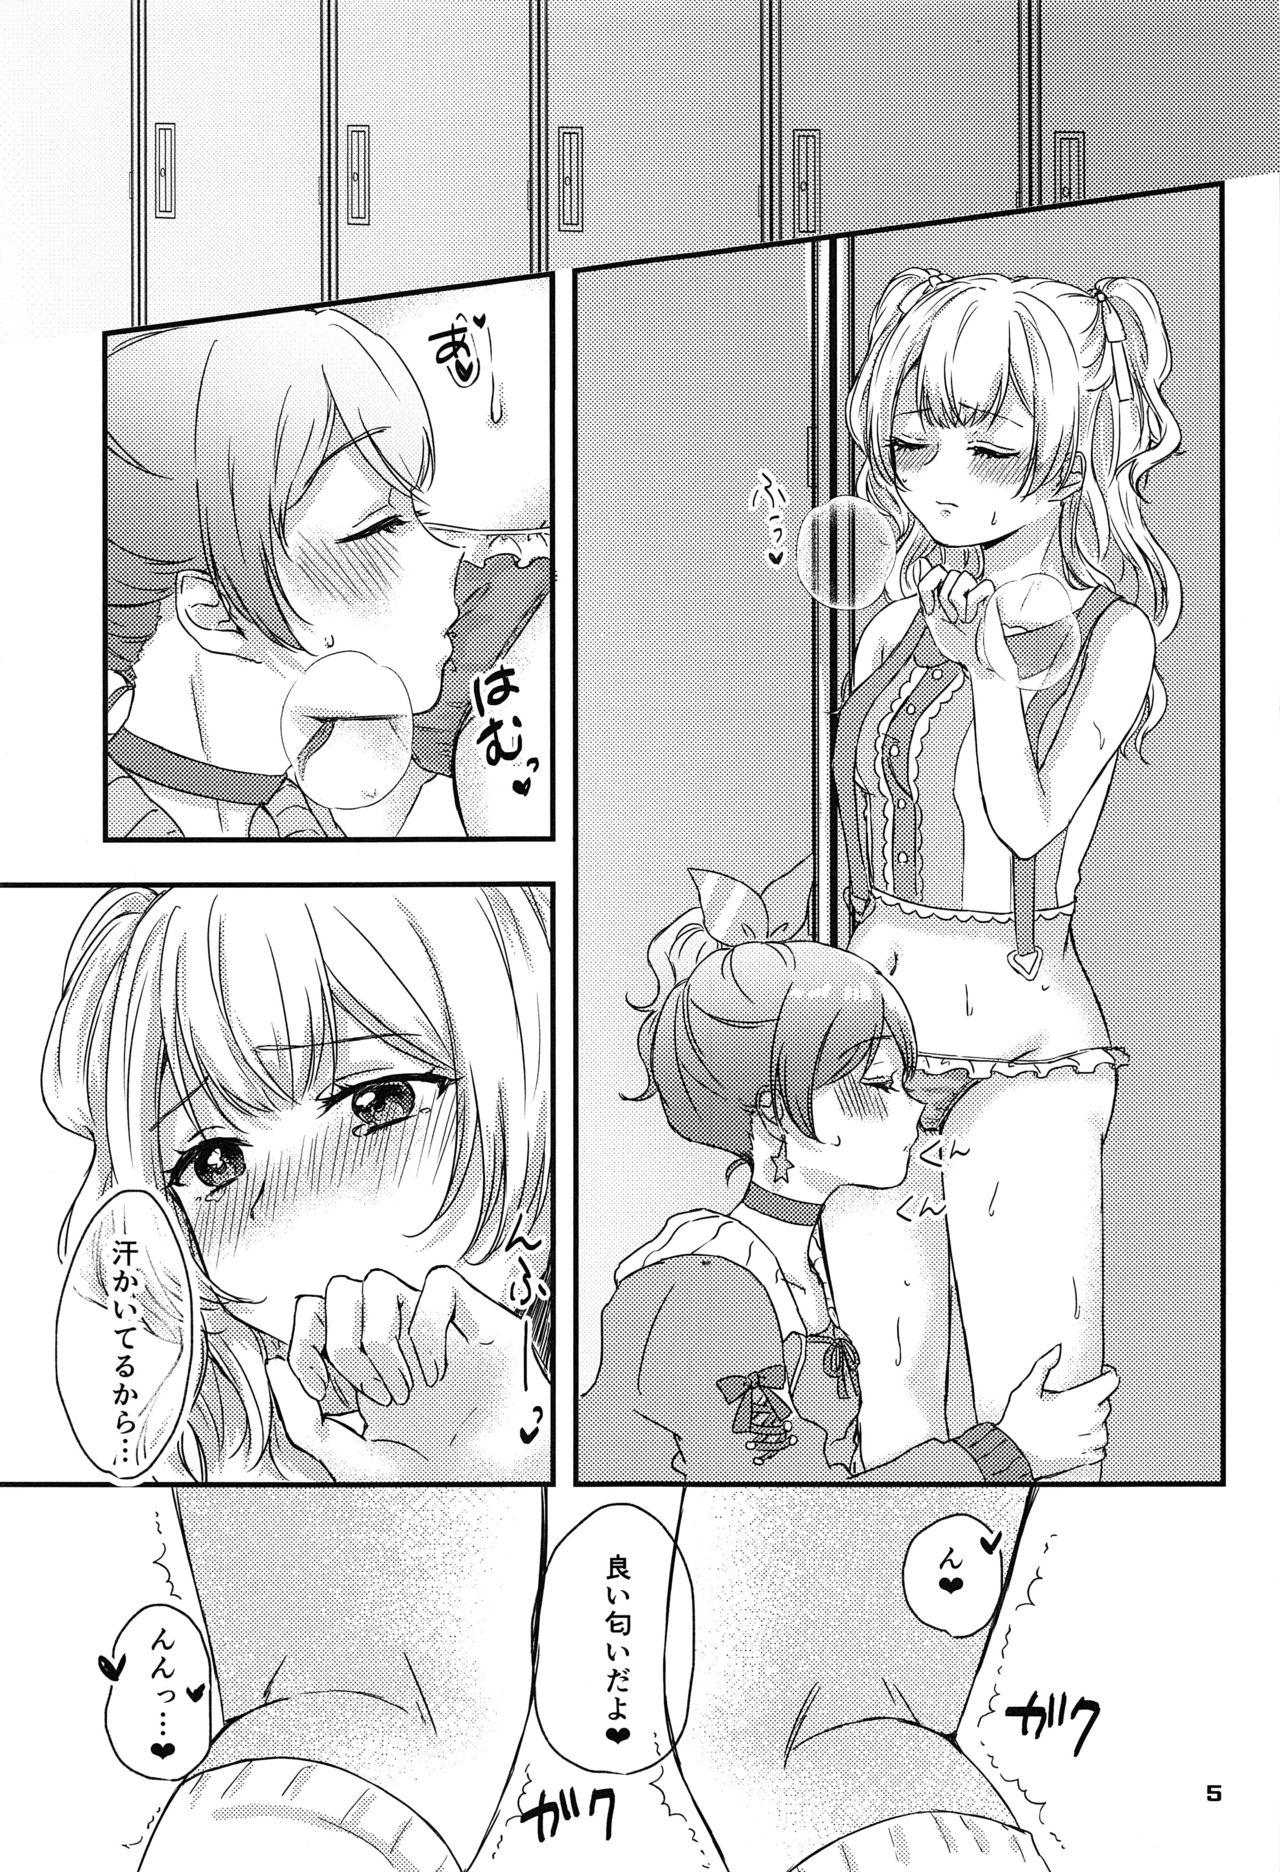 Unshaved Sweet Costume Sex time. - Bang dream 18 Year Old - Page 3